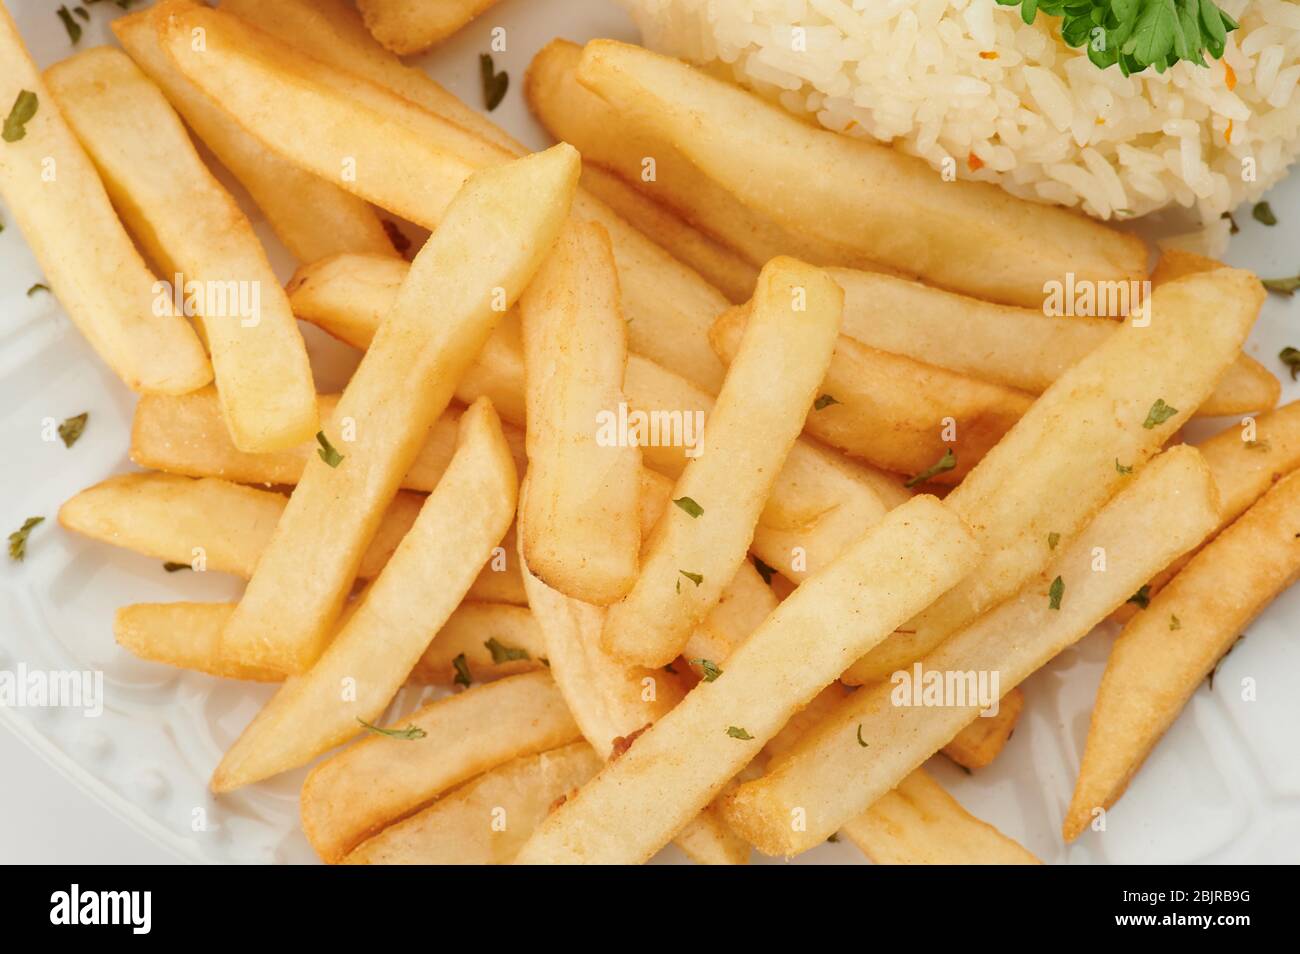 French fries with herbs macro close up view on plate Stock Photo